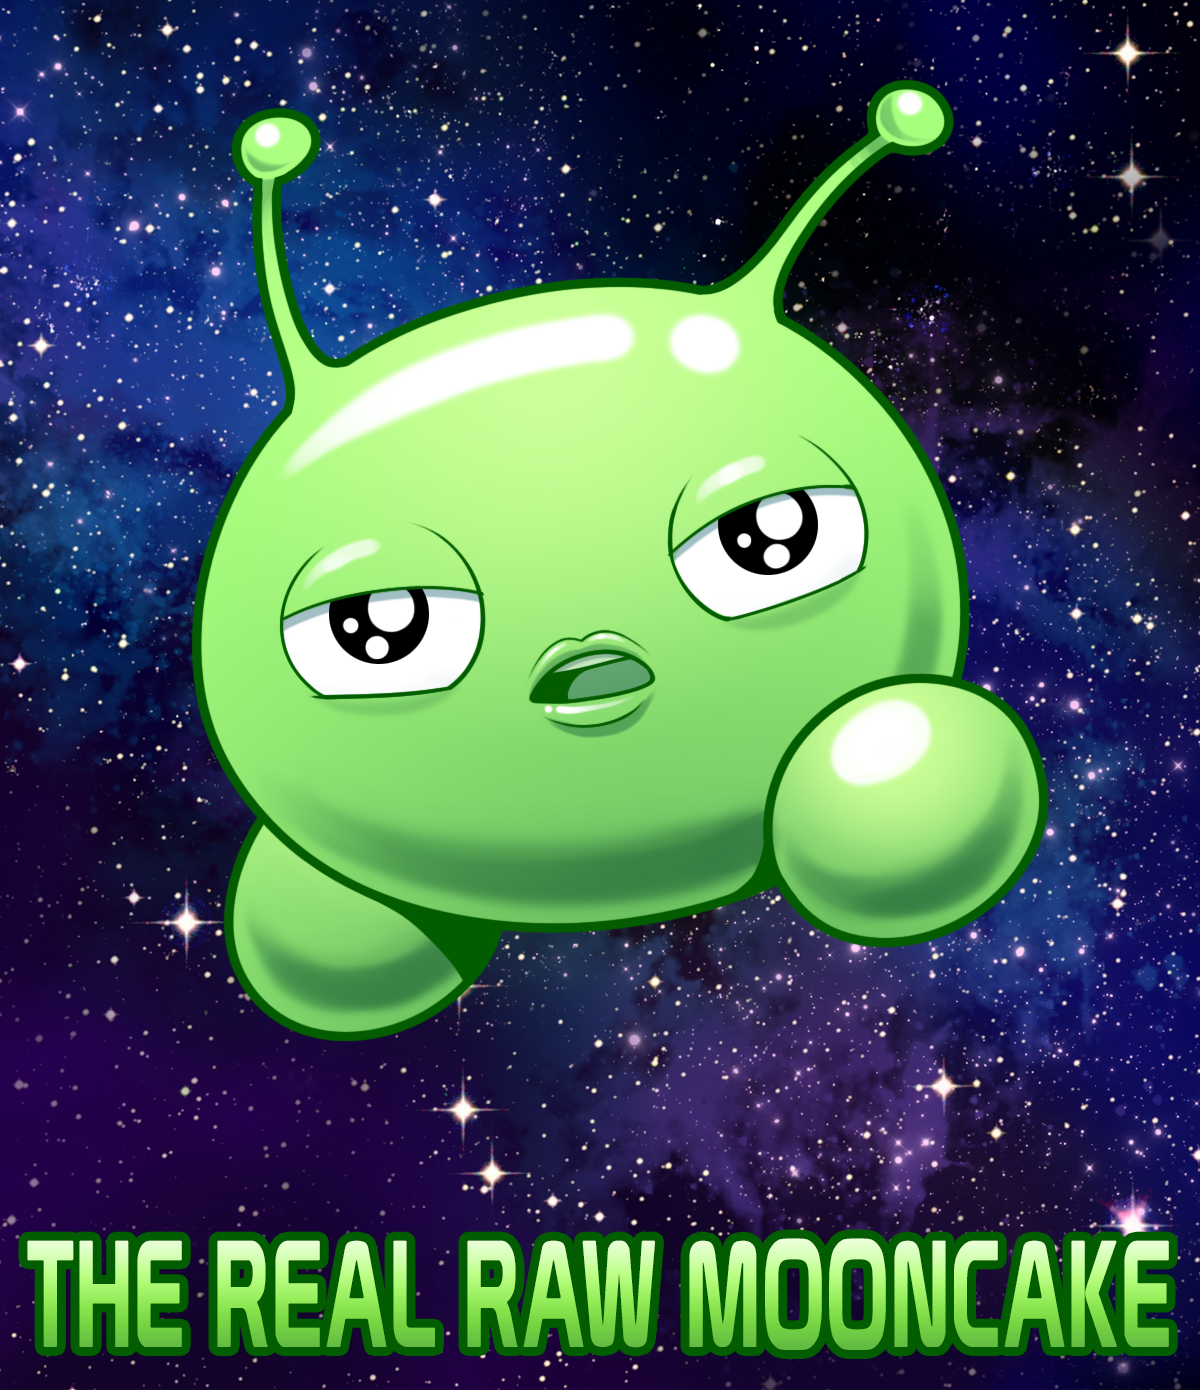 I present to you The REAL RAW mooncake. Oh god, why did I draw this???, FinalSpace. Space anime, Space drawings, Anime wallpaper phone